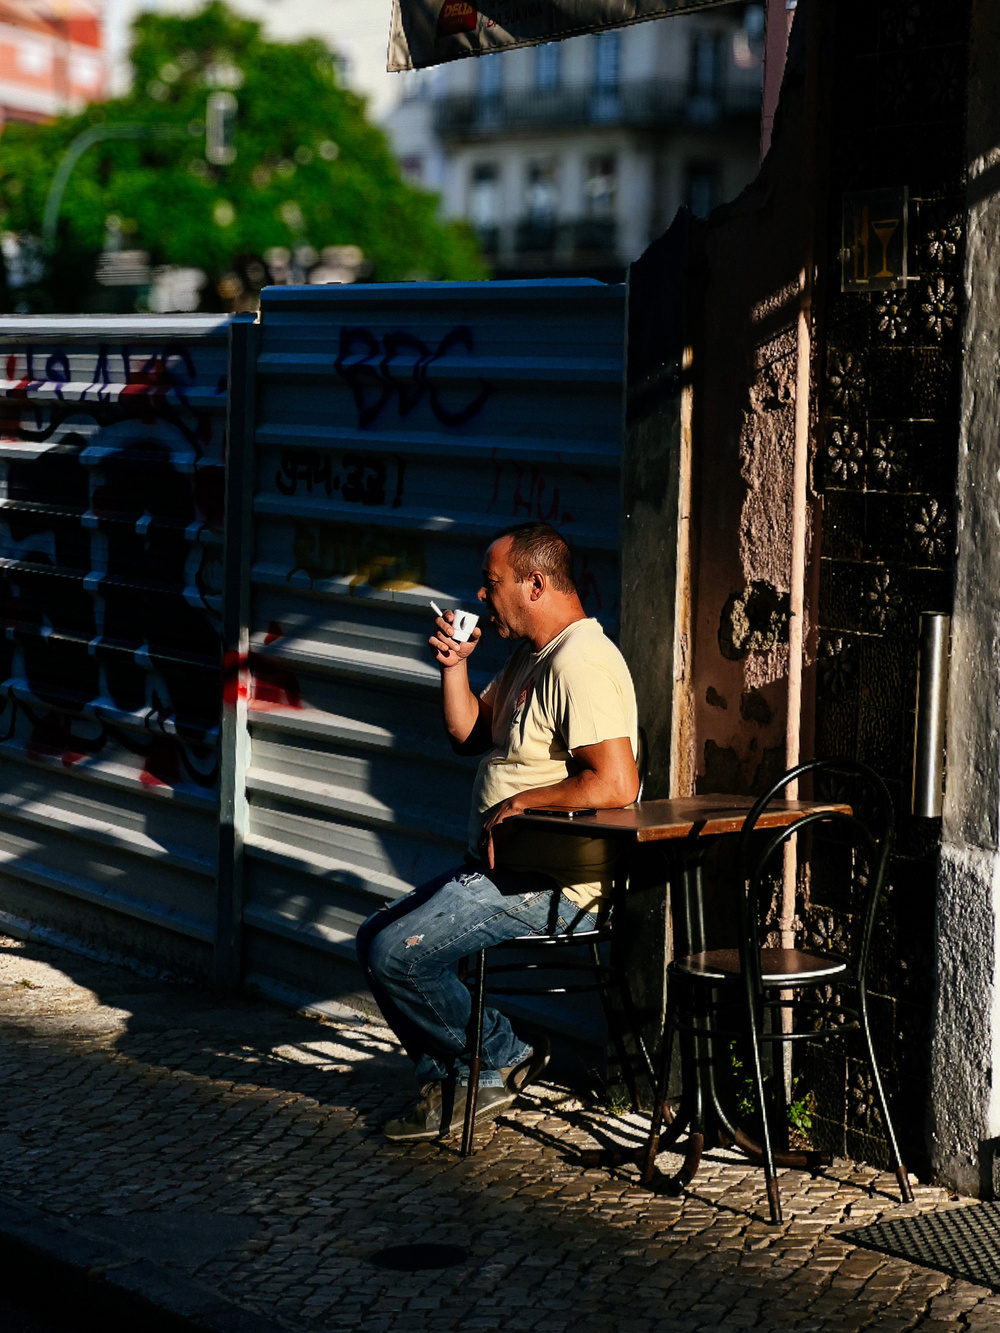 A man sits alone having his morning coffee on a table outside a small cafe, near a construction site.